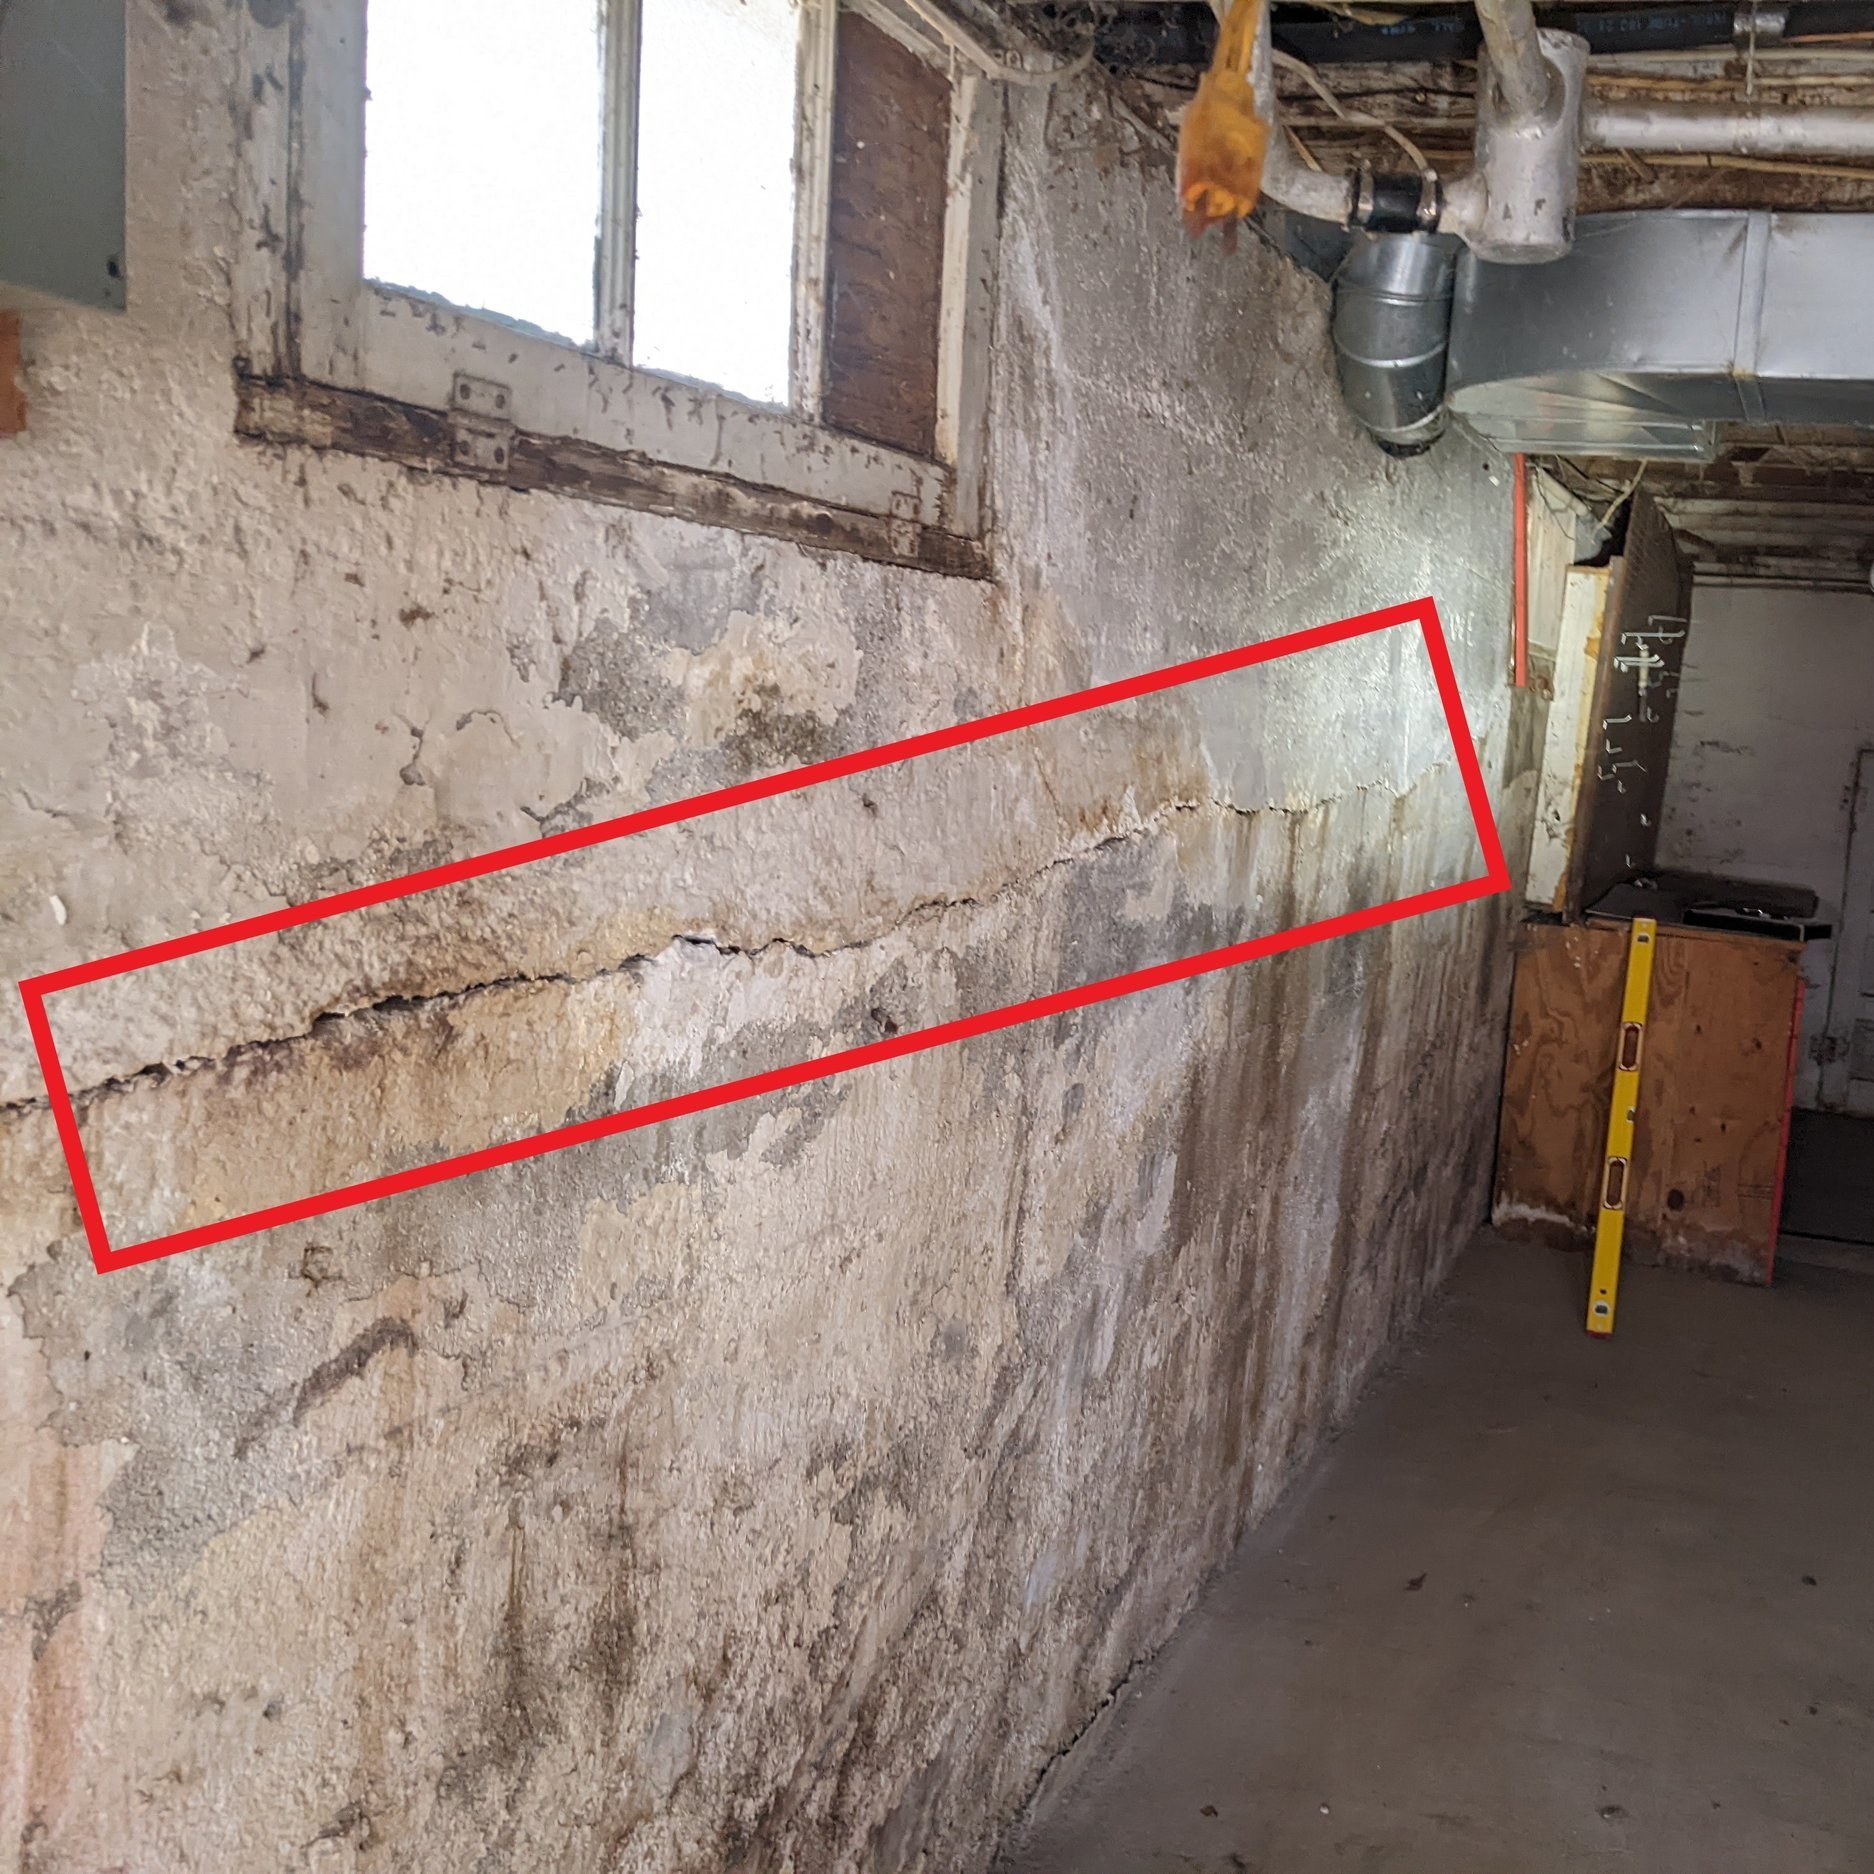 Horizontal crack in concrete foundation wall.